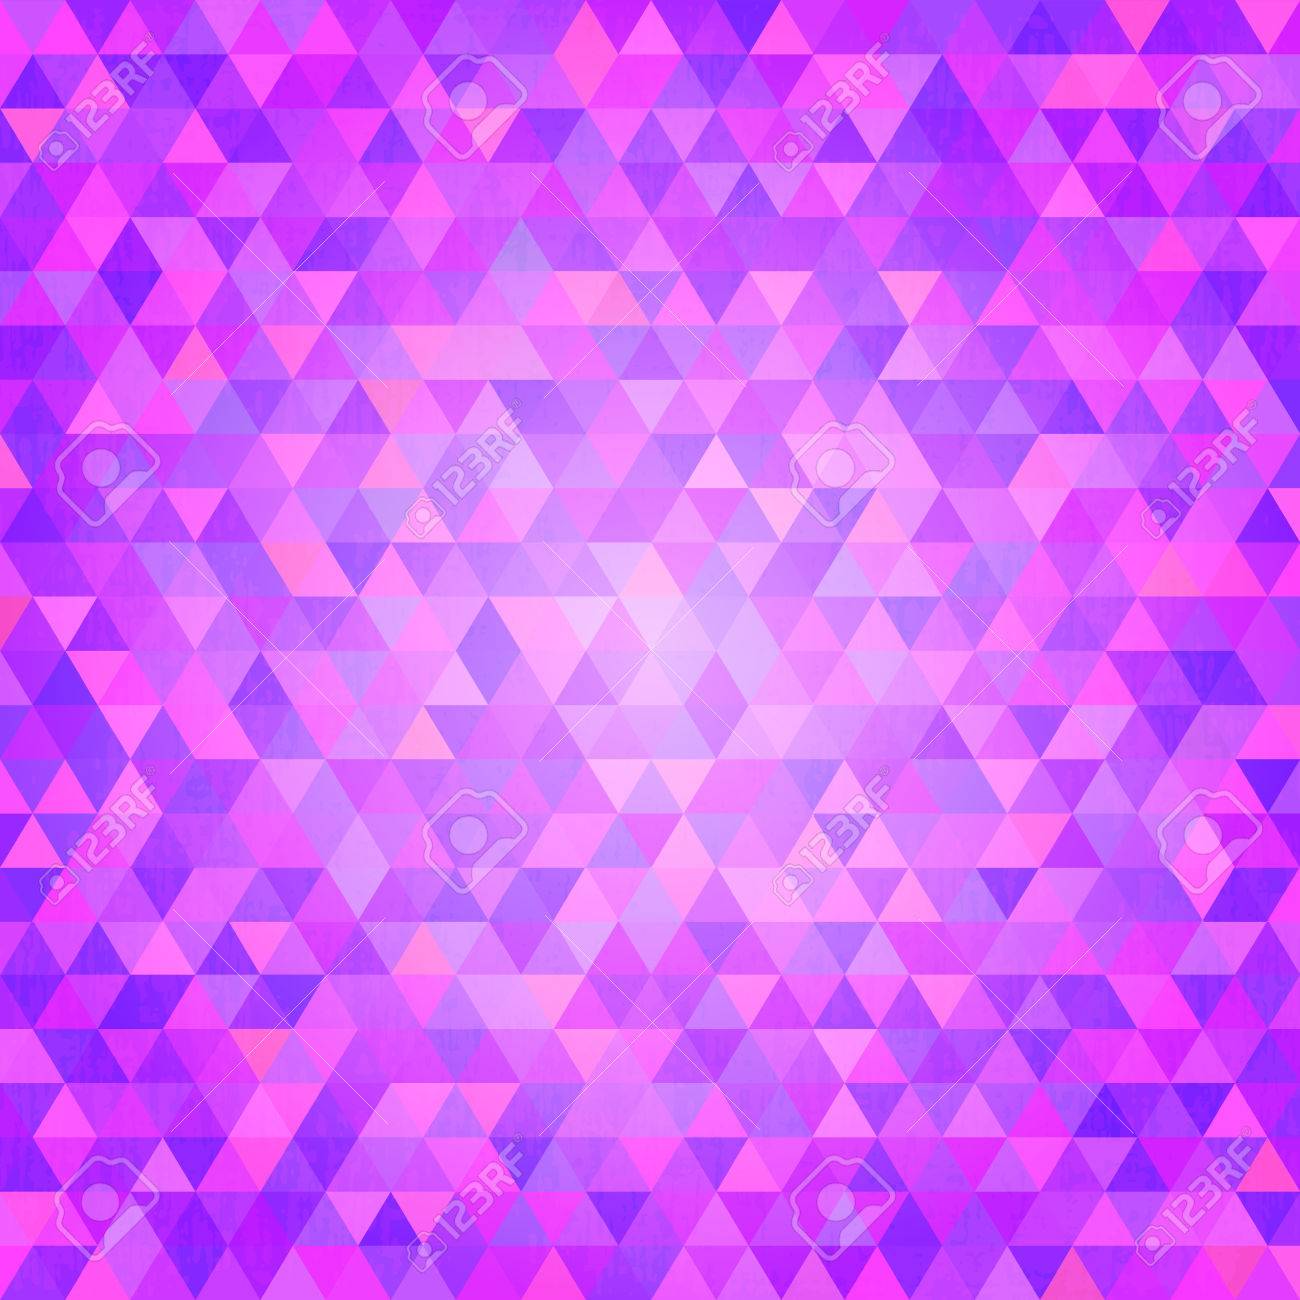 Abstract Minimalistic Background With Purple Triangles Geometric